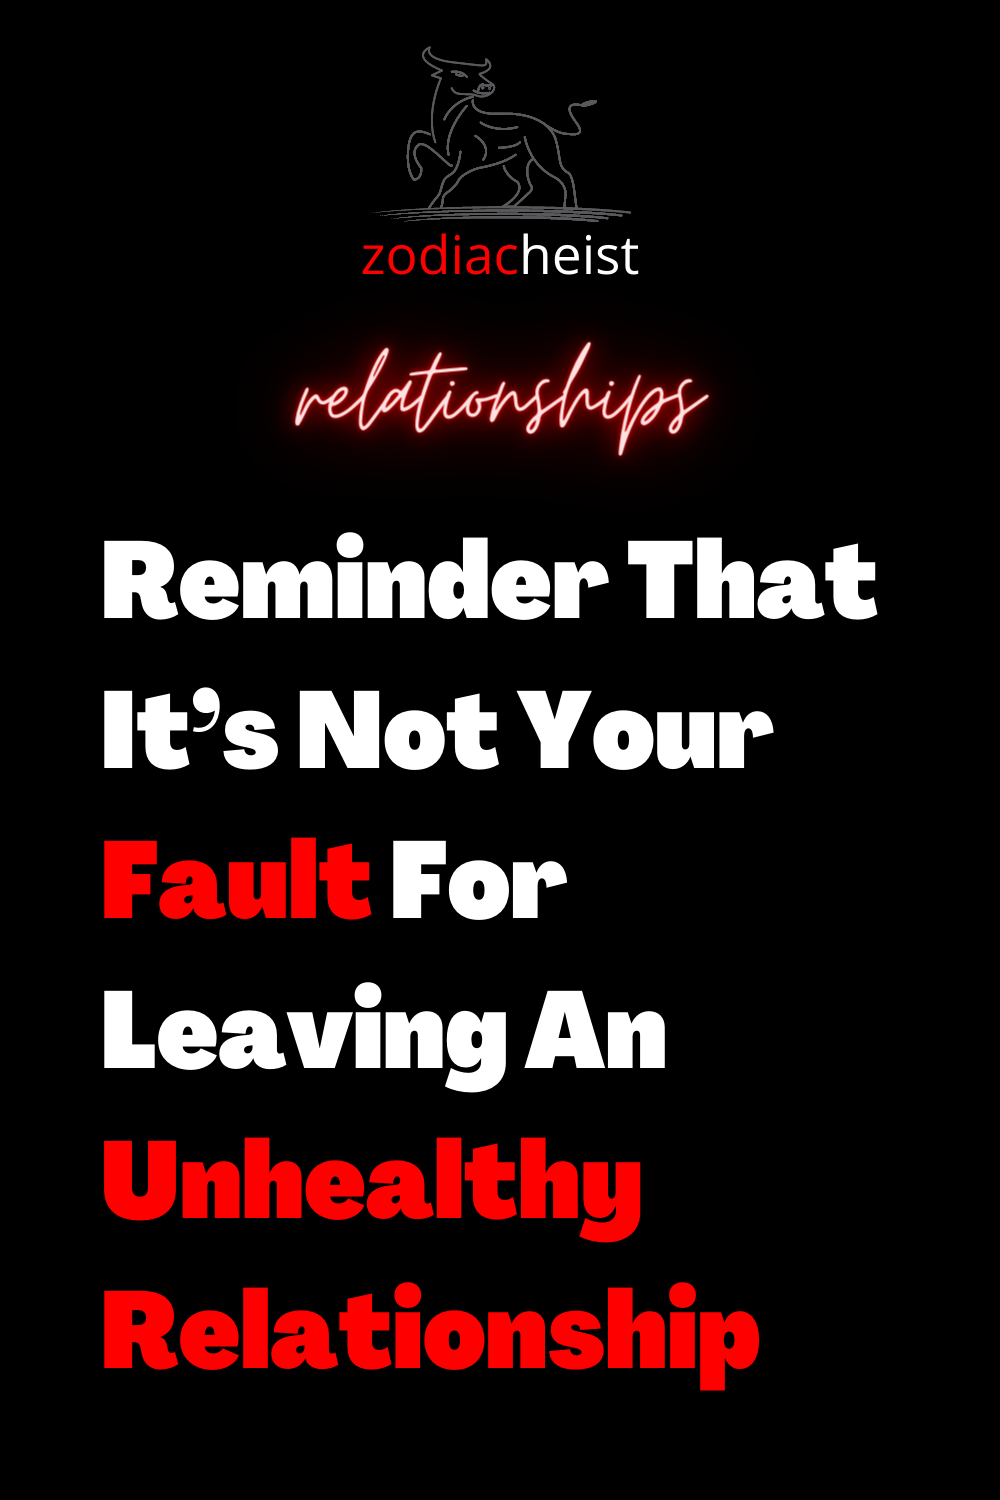 Reminder That It’s Not Your Fault For Leaving An Unhealthy Relationship